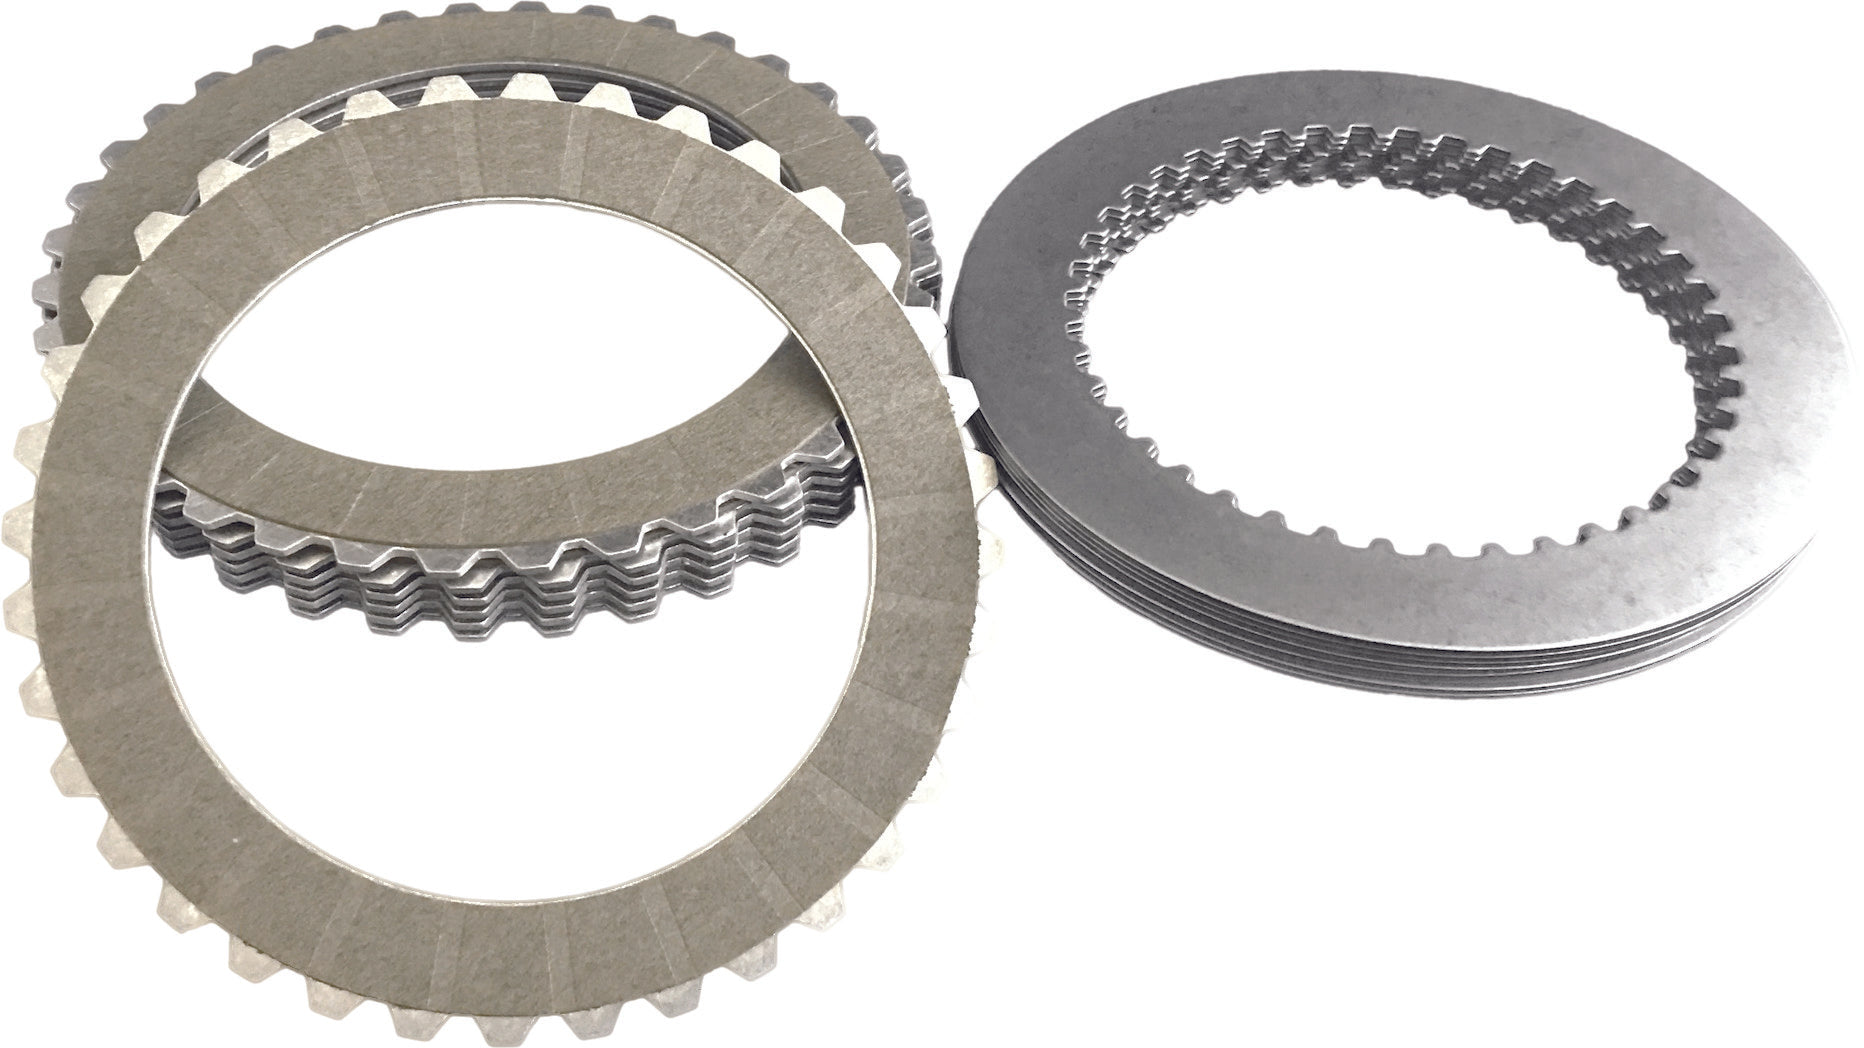 ENERGY ONE, ENERGY ONE E1 REPLACEMENT CLUTCH KIT FOR BRUTE IV EXTREME 07 FLT RP-0053